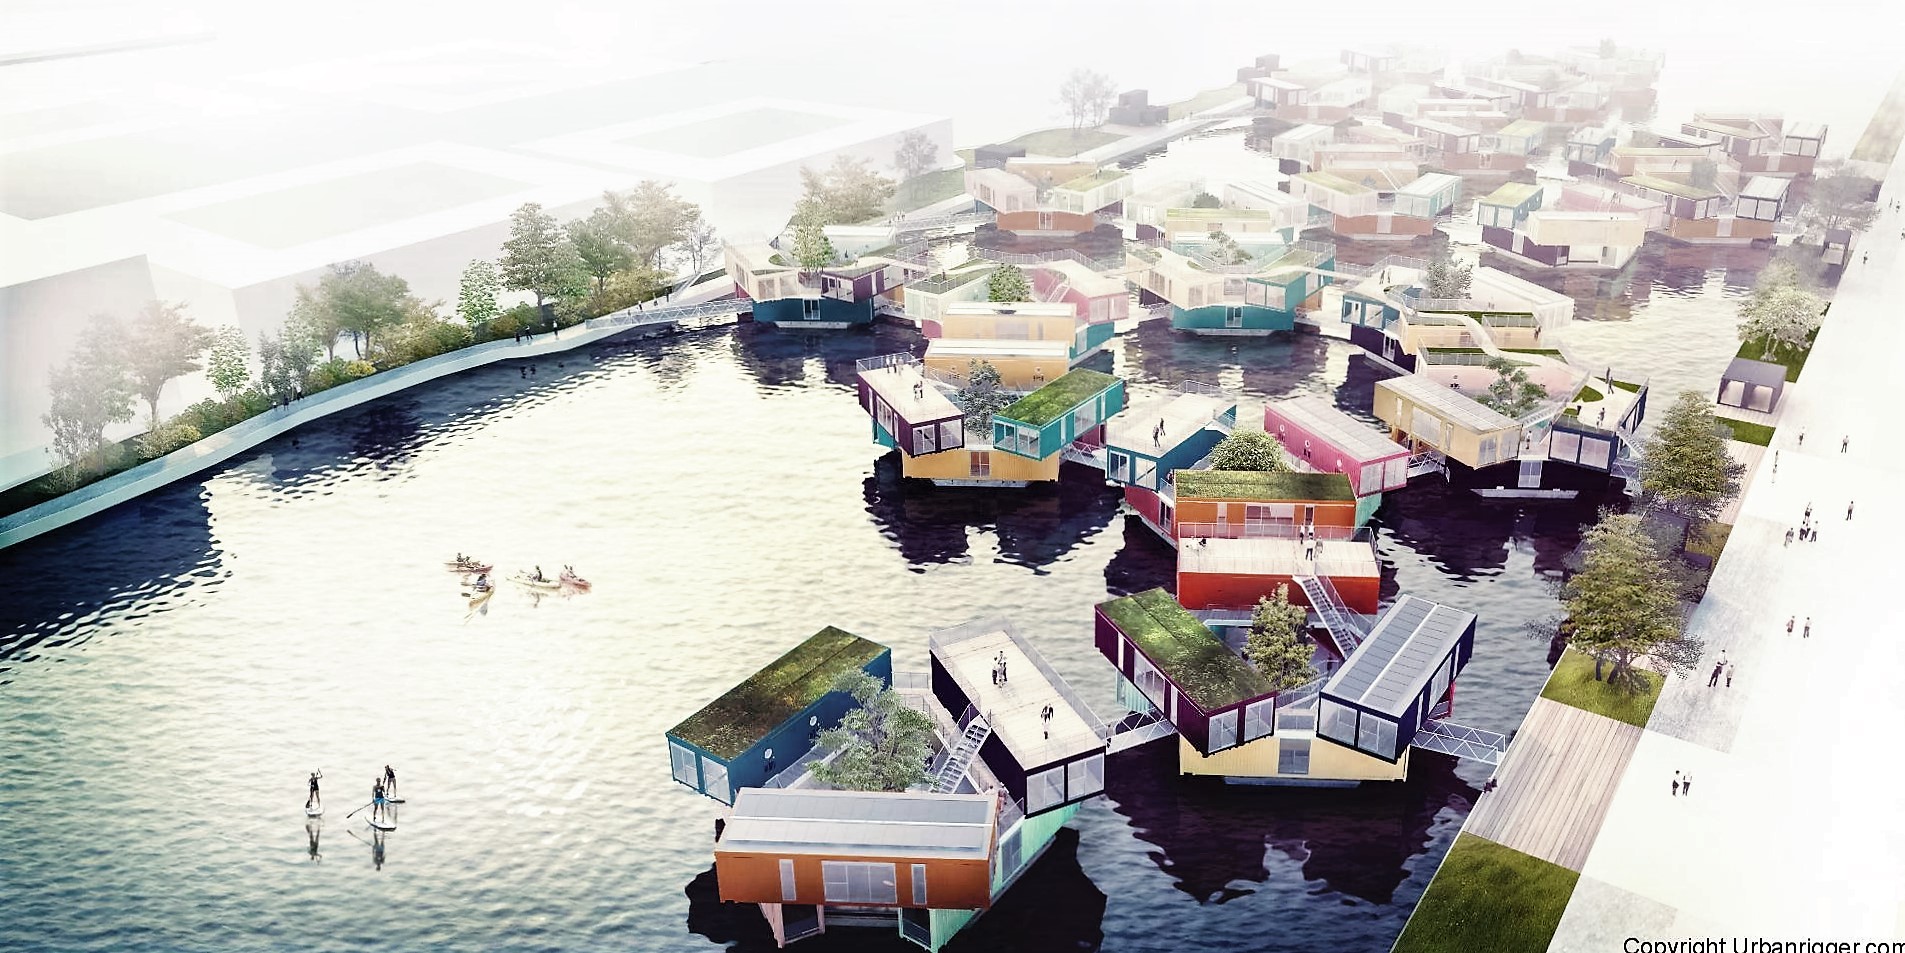 Urban Rigger, Bjarke Ingels, shipping containers